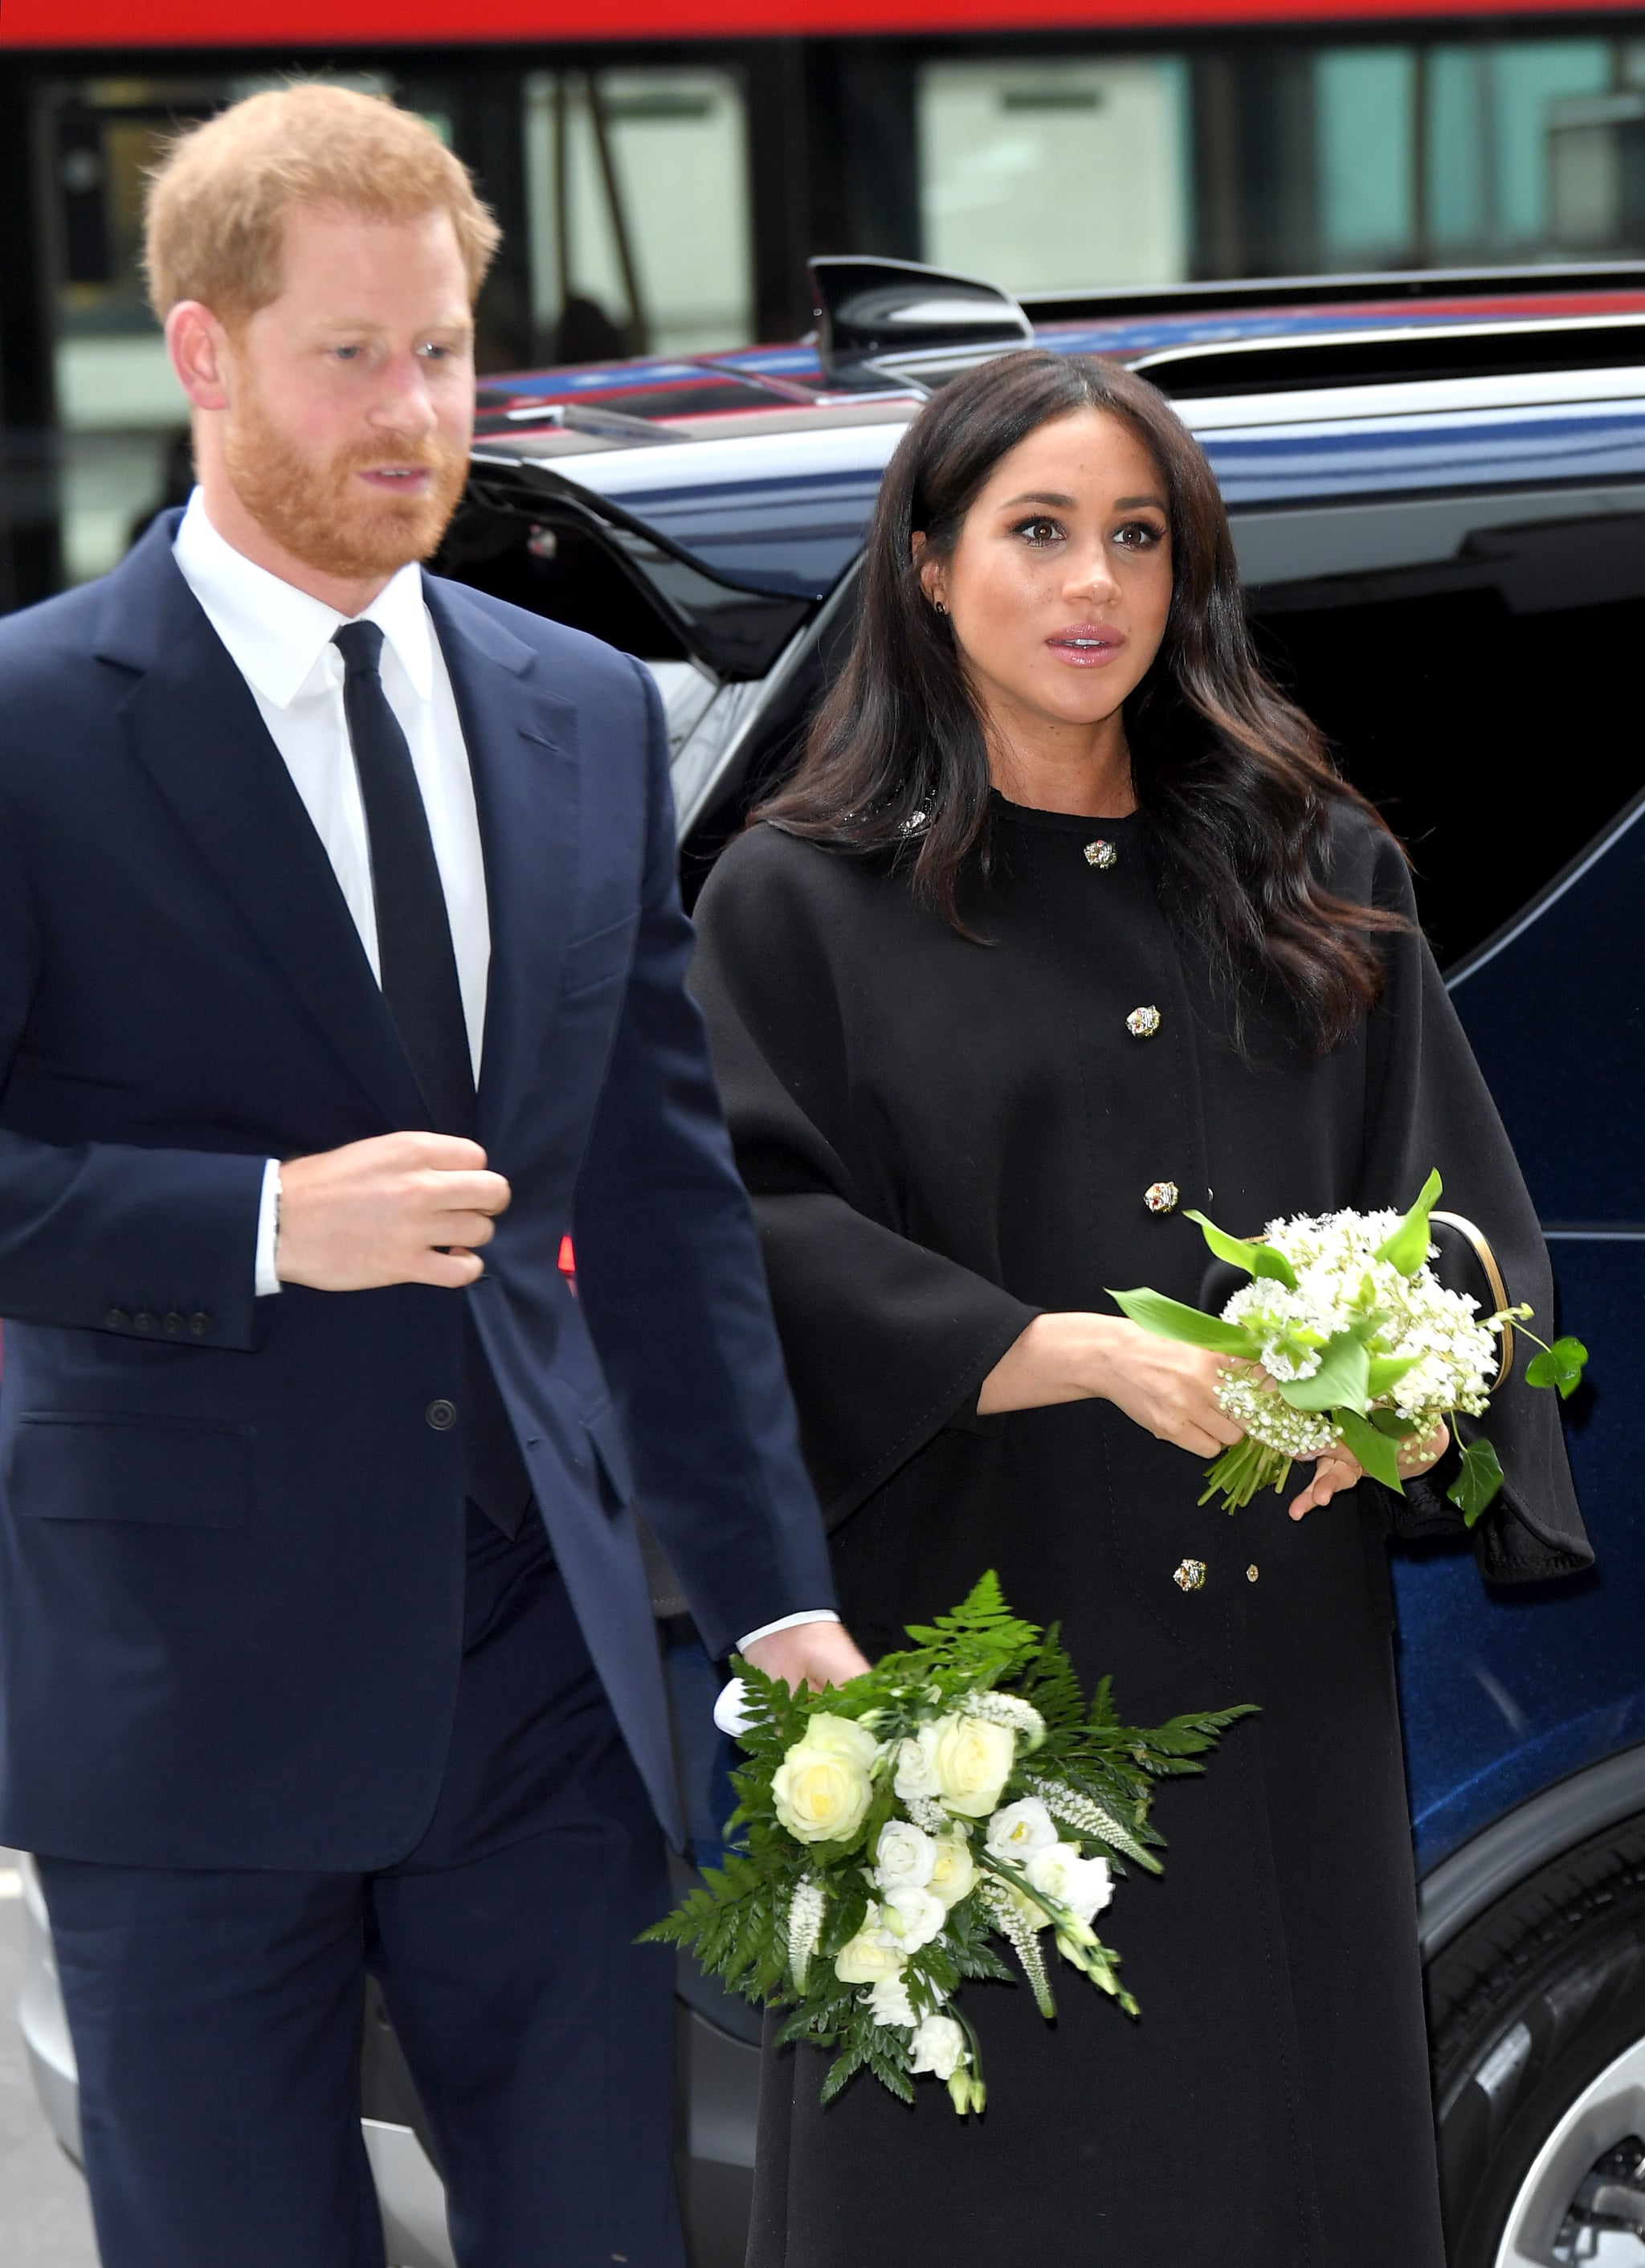 LONDON, ENGLAND - MARCH 19:  Prince Harry, Duke of Sussex and Meghan, Duchess of Sussex arrive at New Zealand House to sign the book of condolence after the recent terror attack which saw at least 50 people killed at a Mosque in Christchurch on March 19, 2019 in London, England. (Photo by Karwai Tang/WireImage)